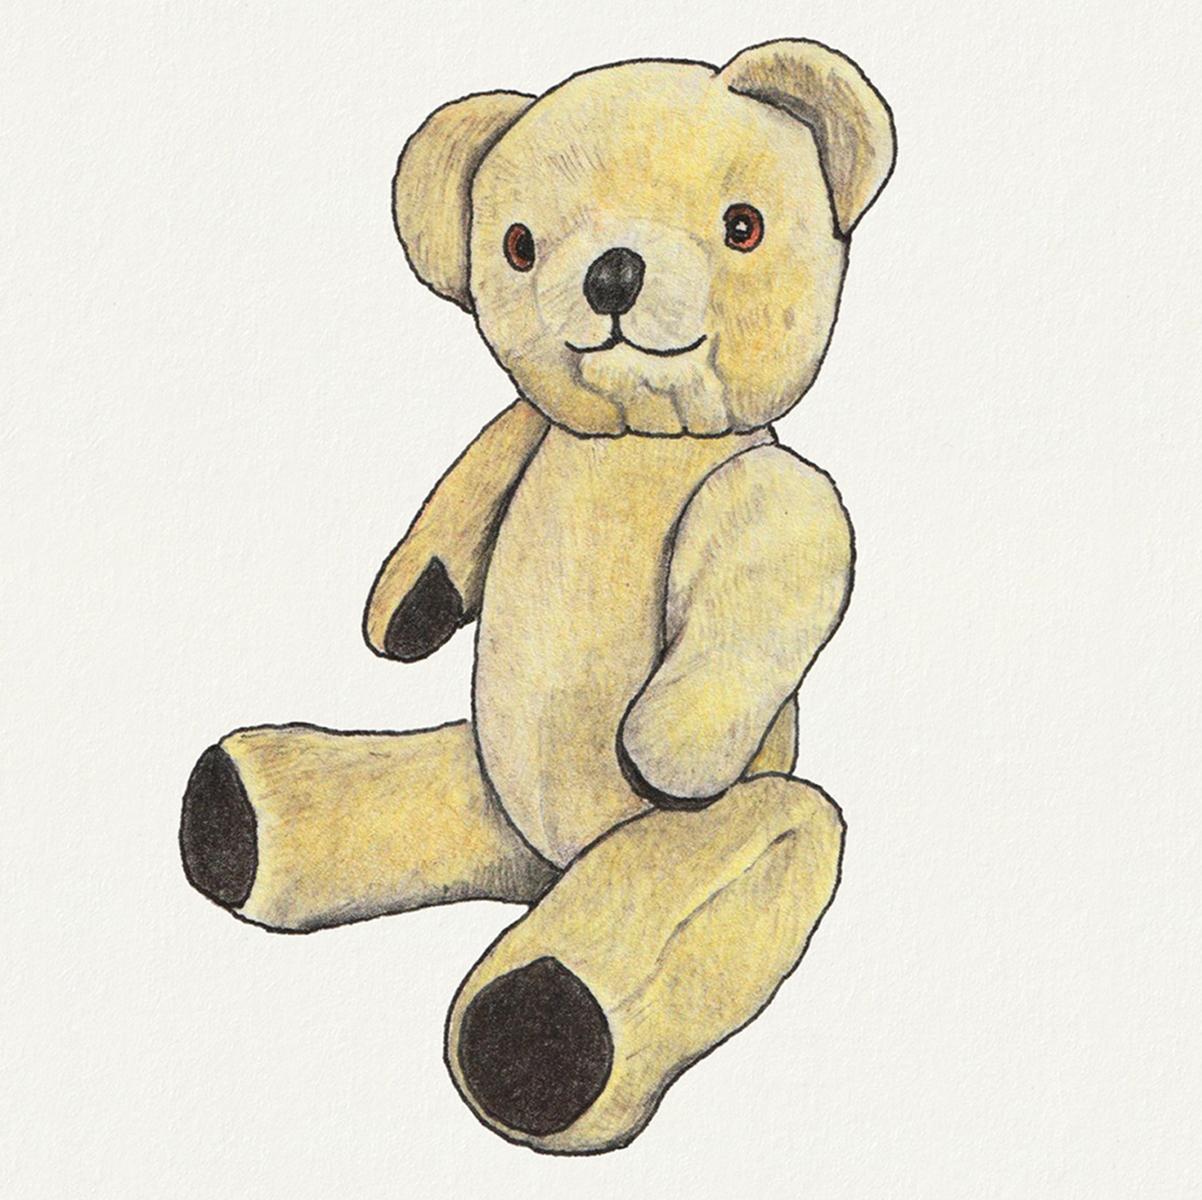 Limited edition print from a pen, ink and coloured pencil drawing of a Teddy Bear